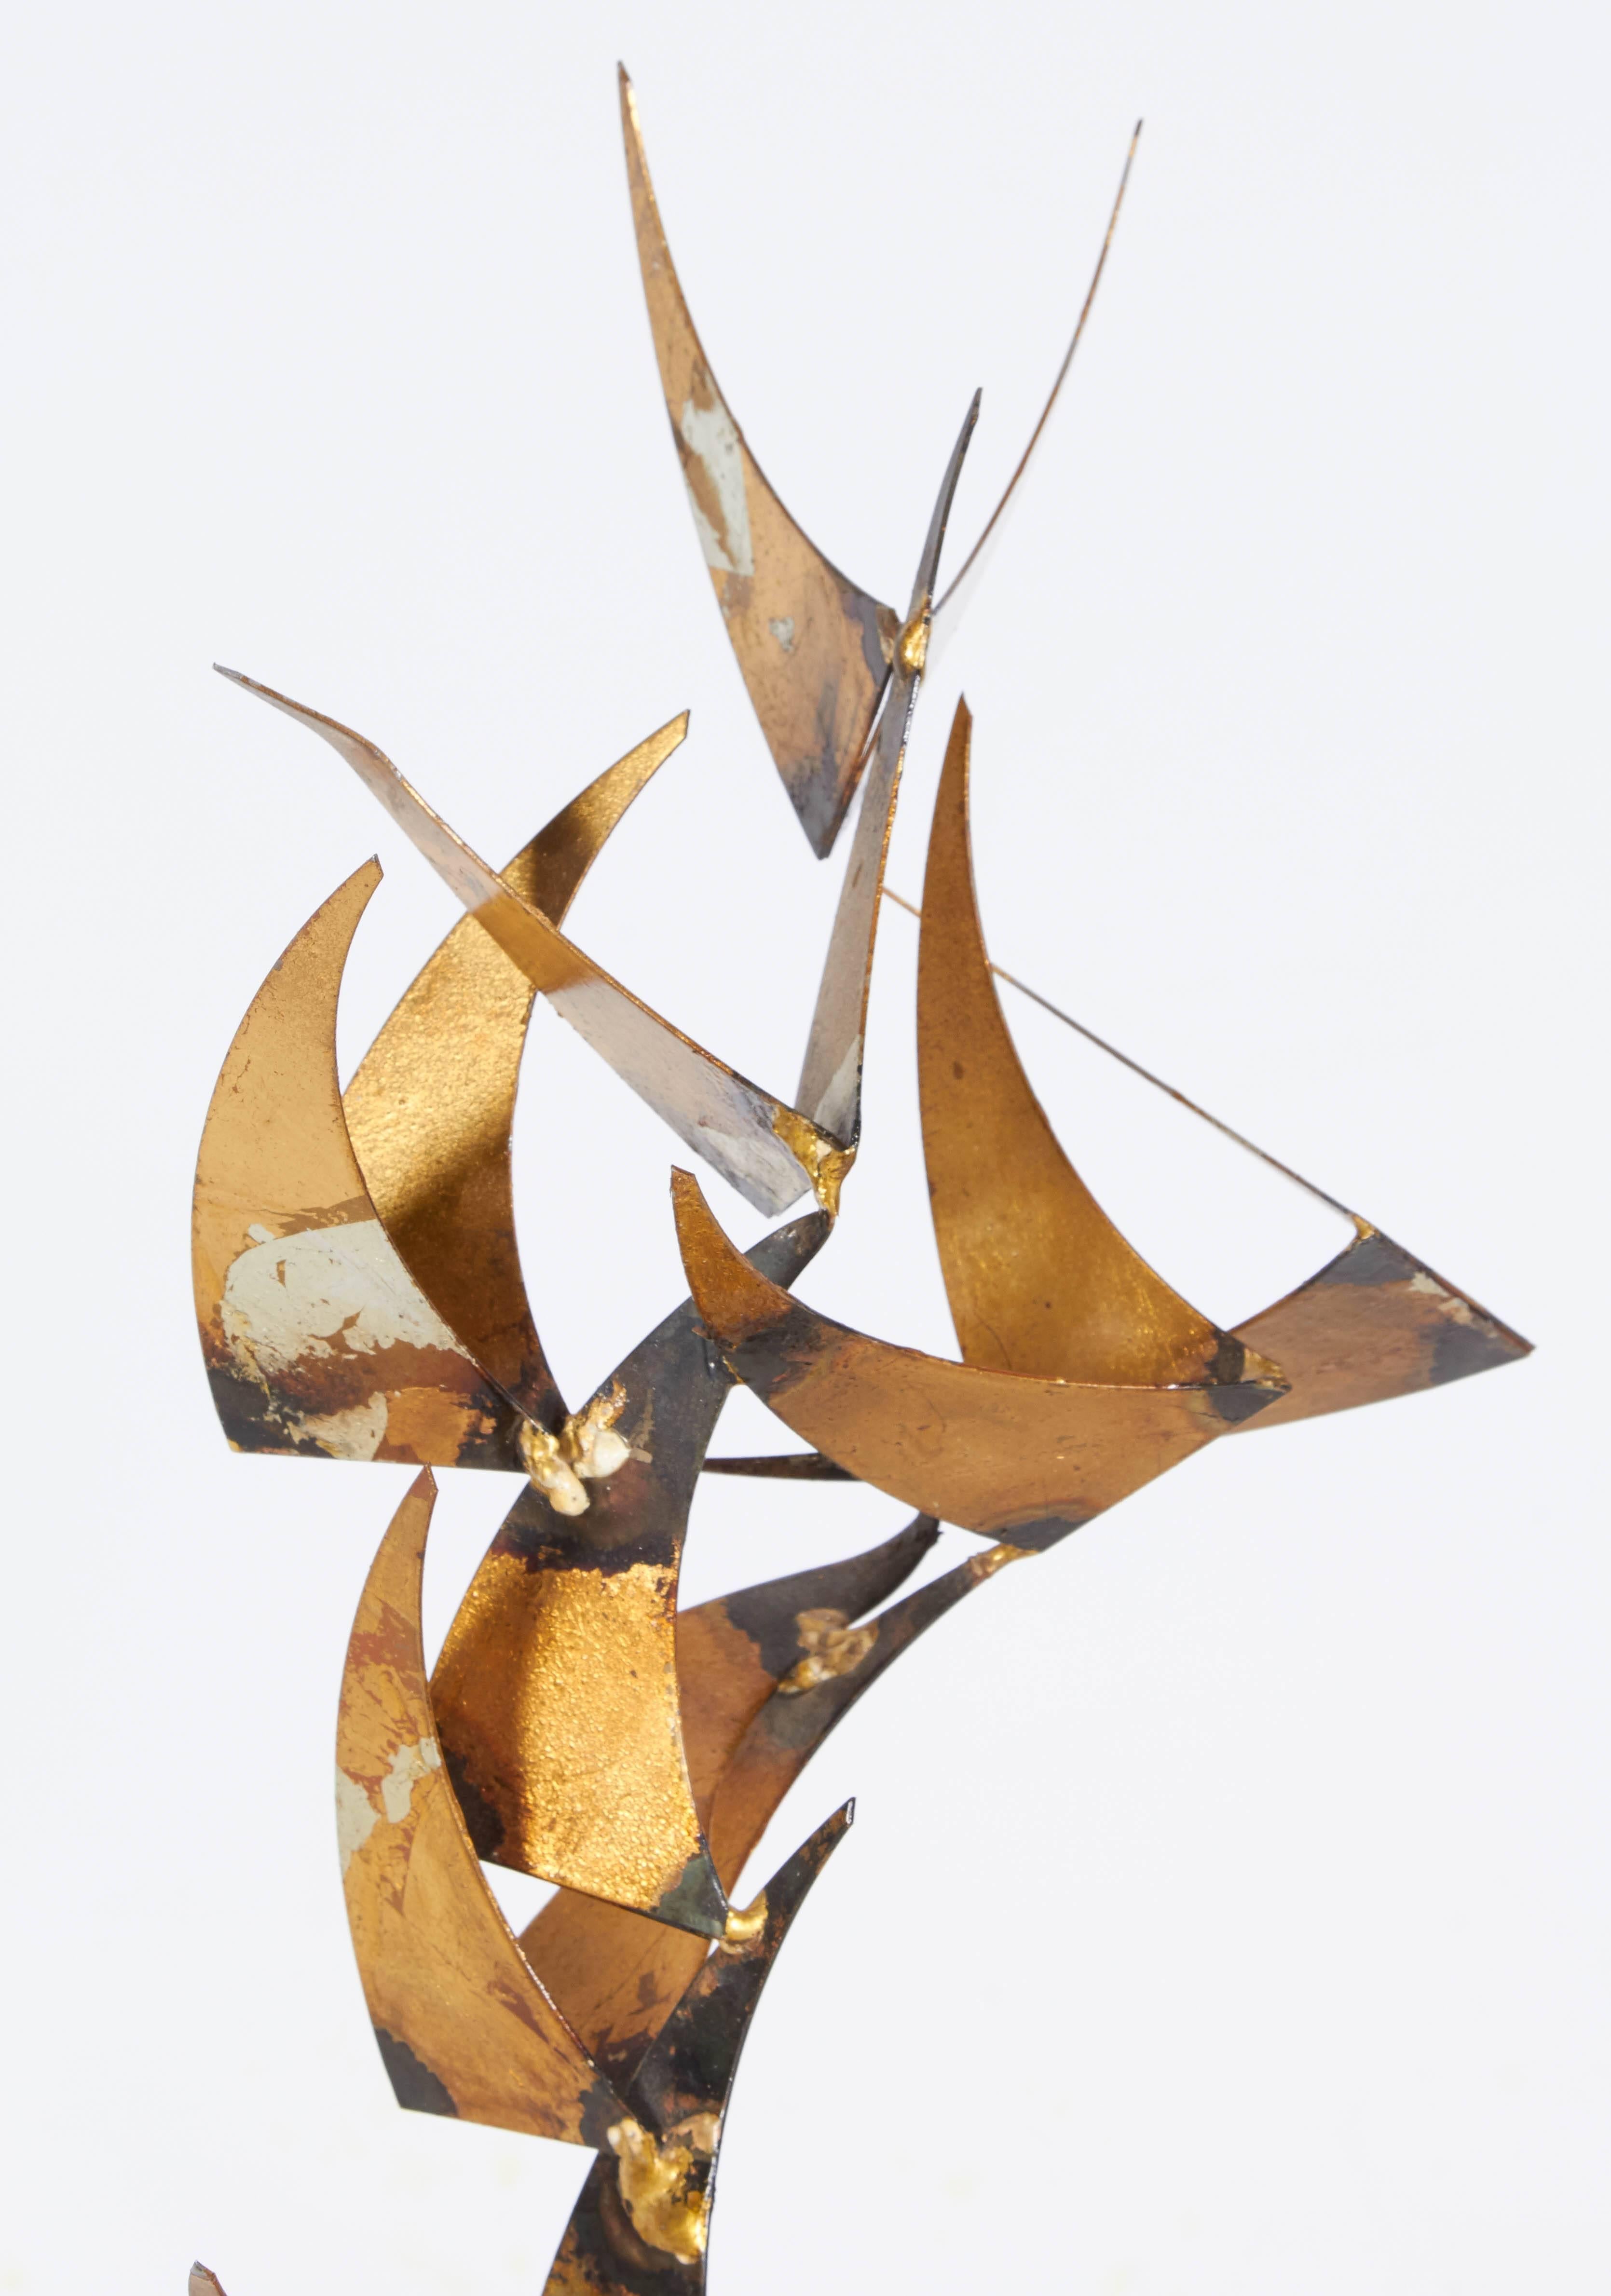 Whimsical Tabletop Sculpture by William Bowie 2